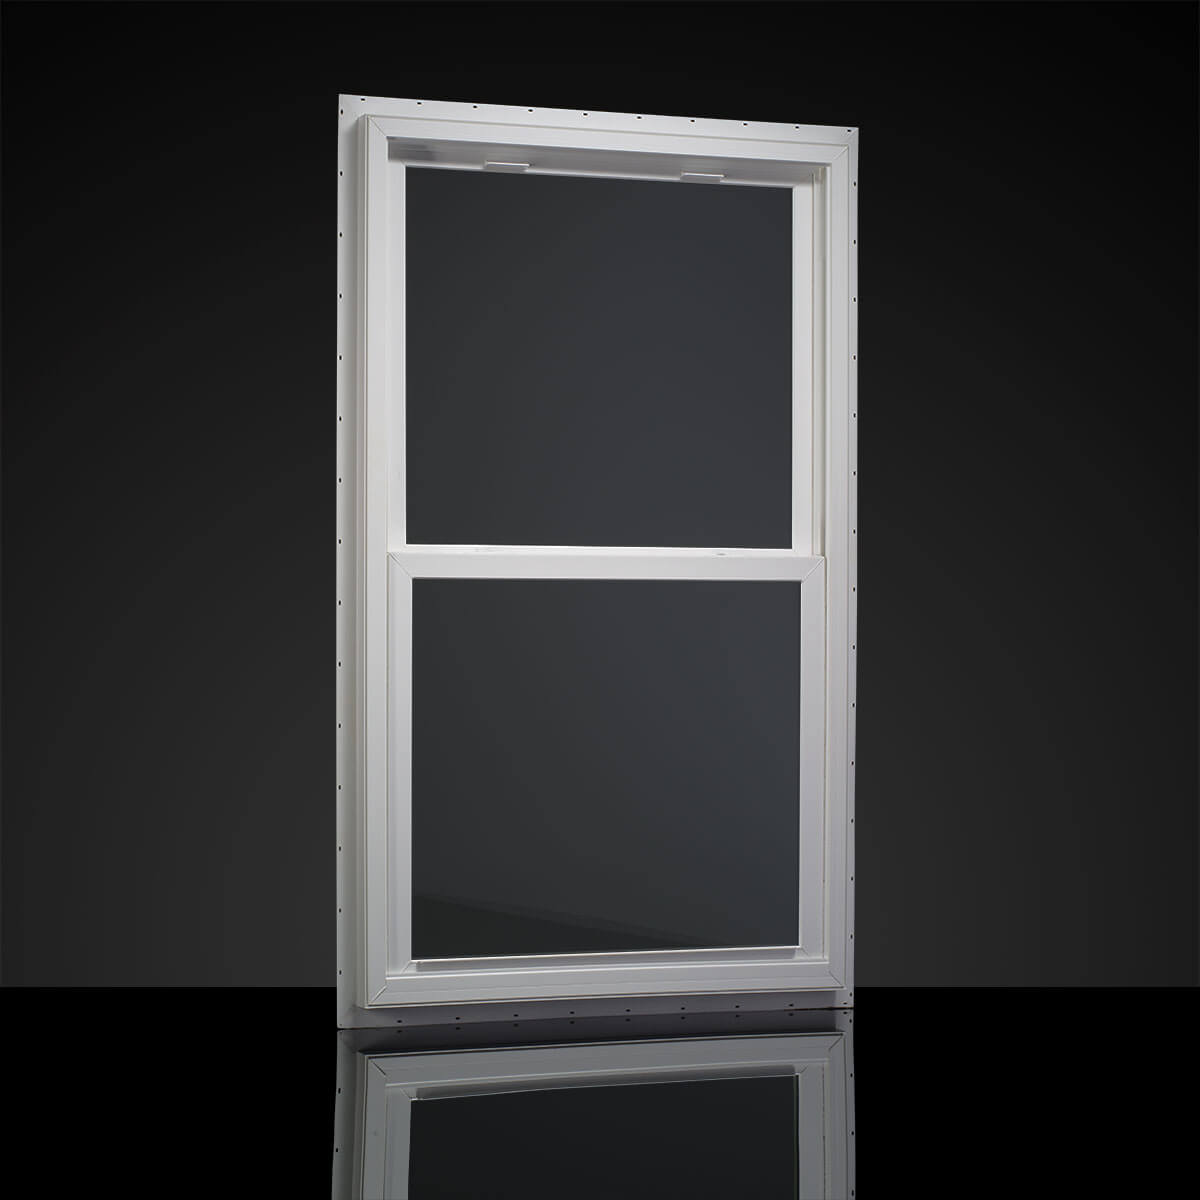 The mi Double Hung window from Big L Windows and Doors